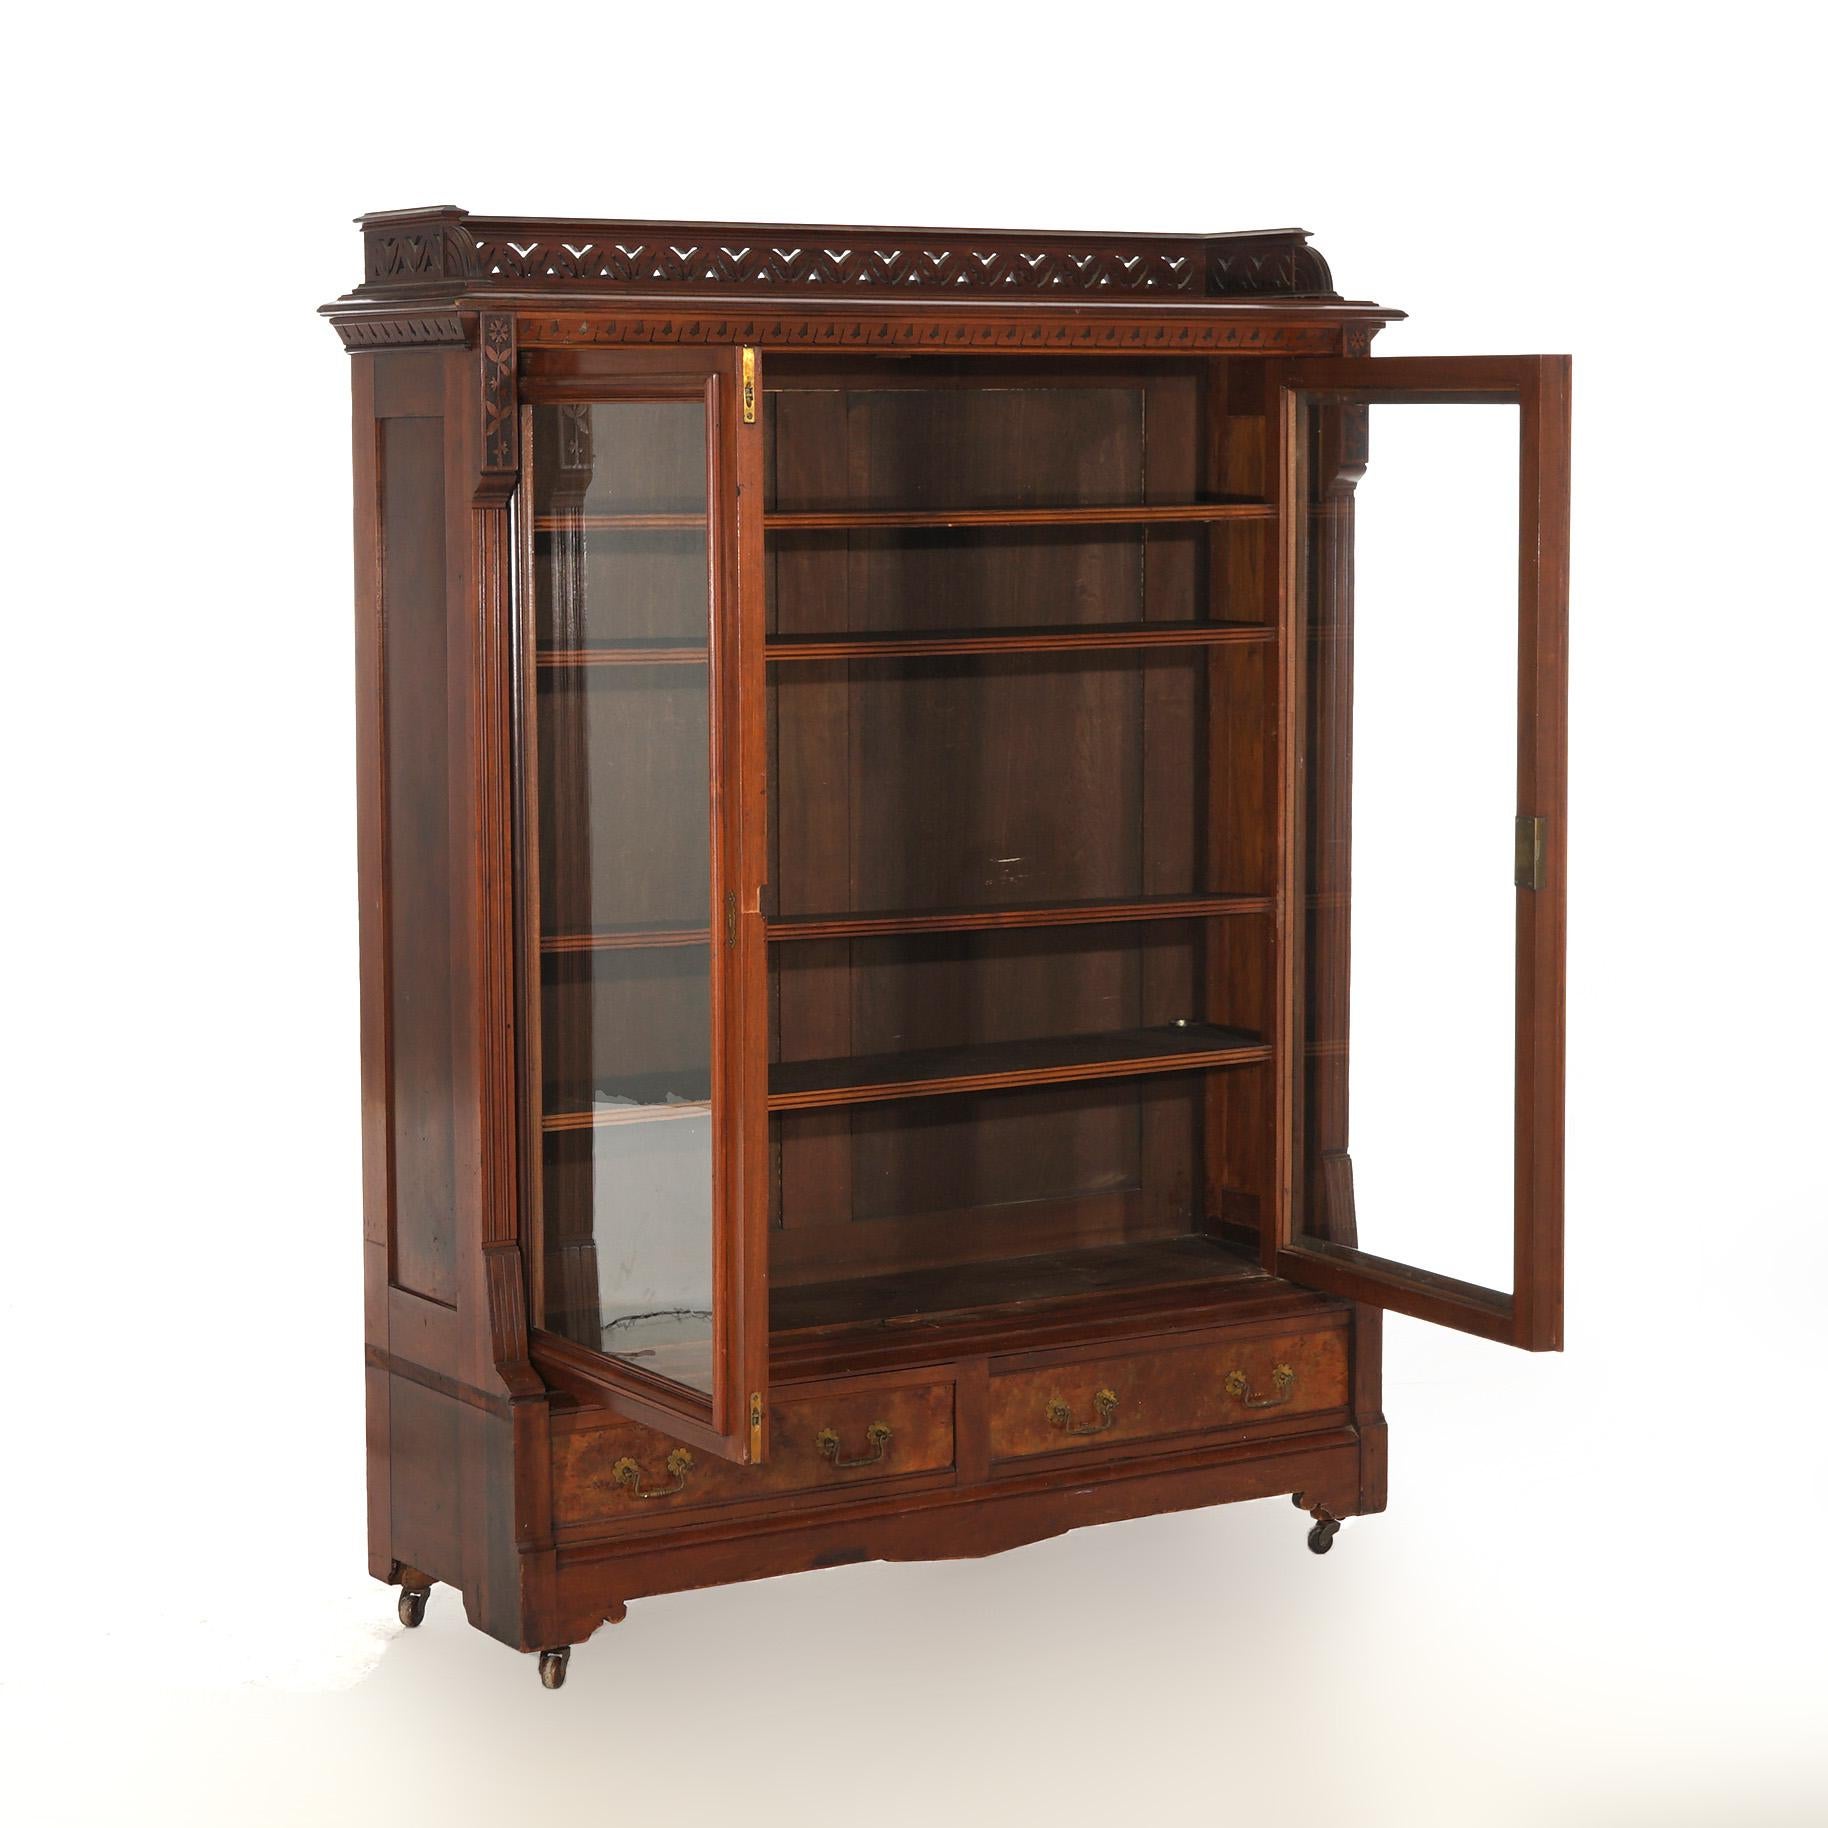 ***Ask About Reduced In-House Shipping Rates - Reliable Service & Fully Insured***
An antique Eastlake bookcase offers walnut and burl construction with pierced gallery over case with double glass doors opening to adjustable shelf interior seated on